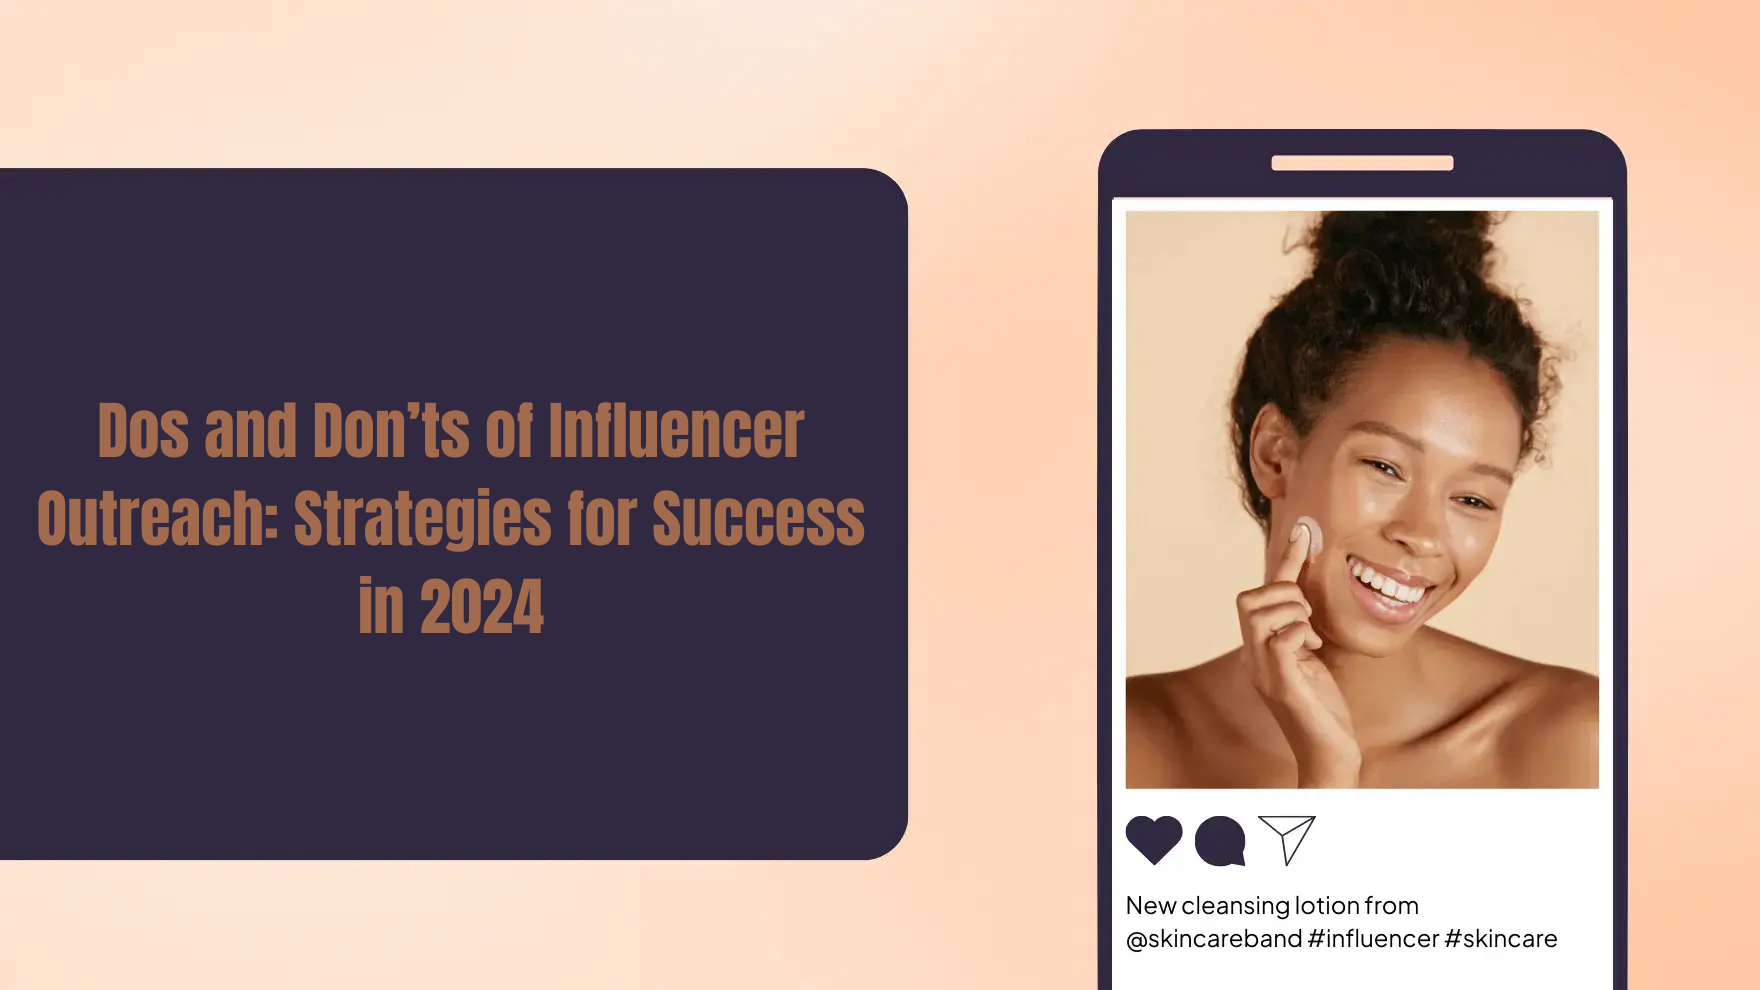 The Dos and Don’ts of Influencer Outreach: Strategies for Success in 2024